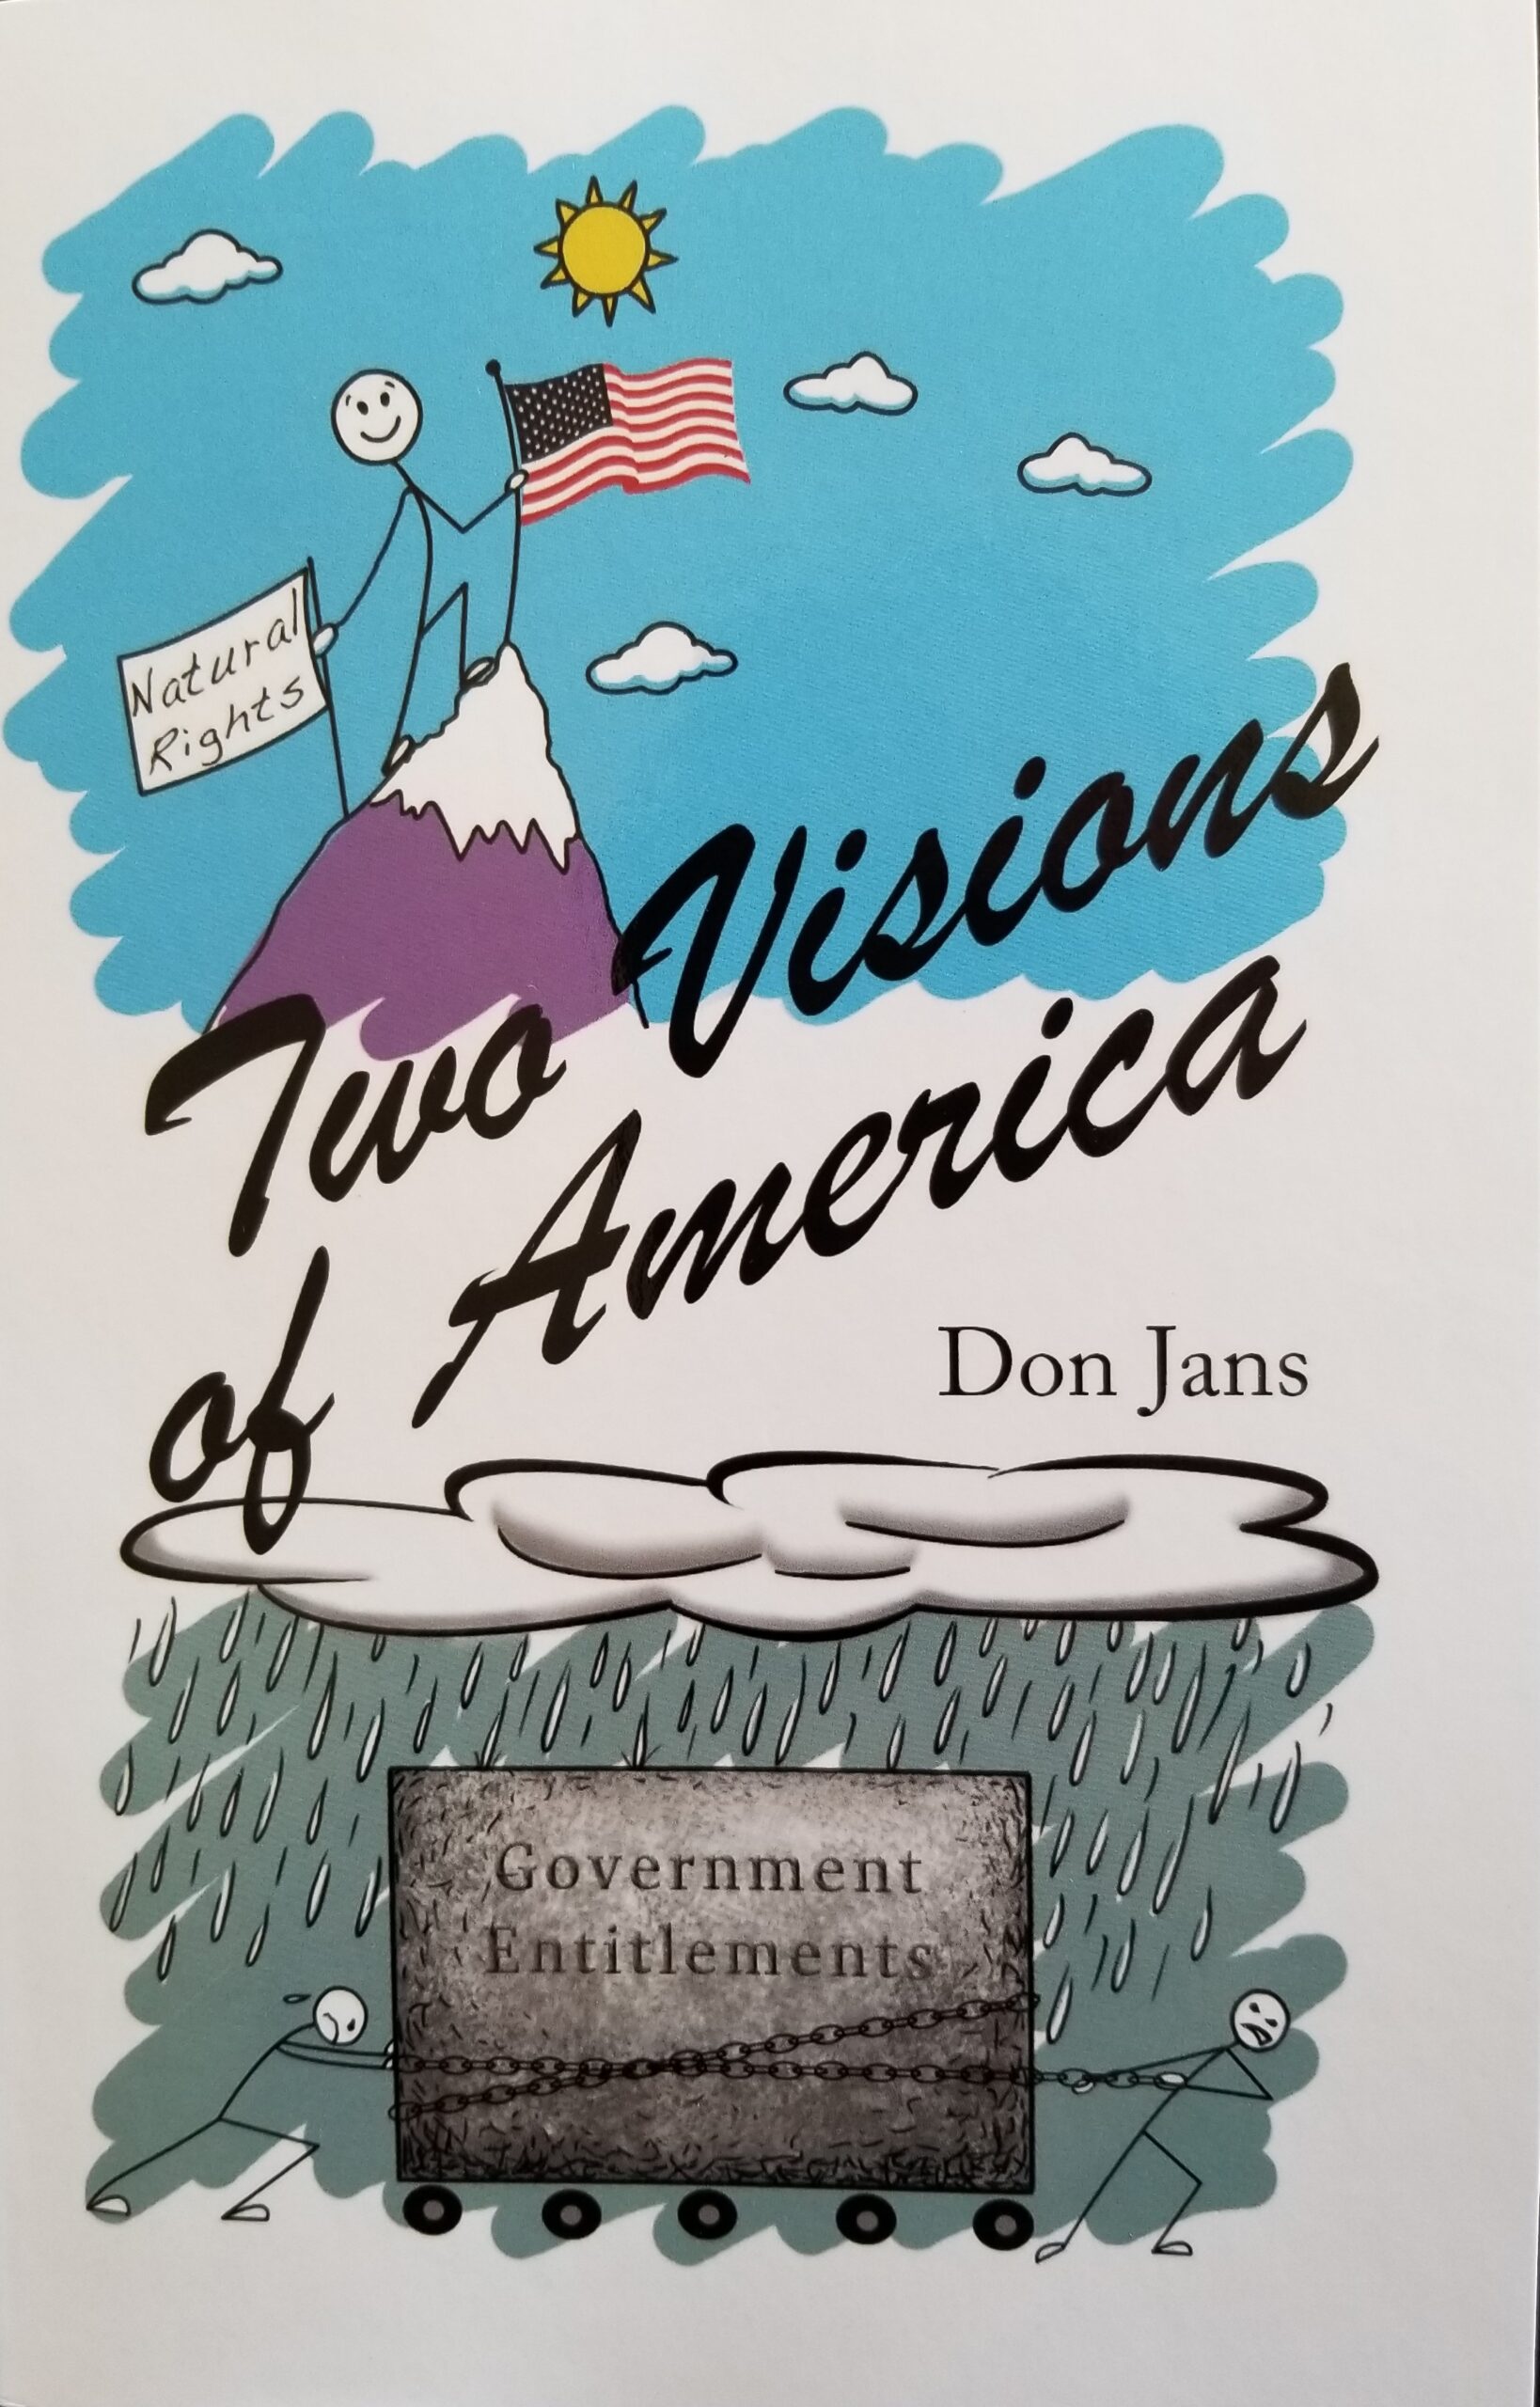 Two Visions of America by Don Jans